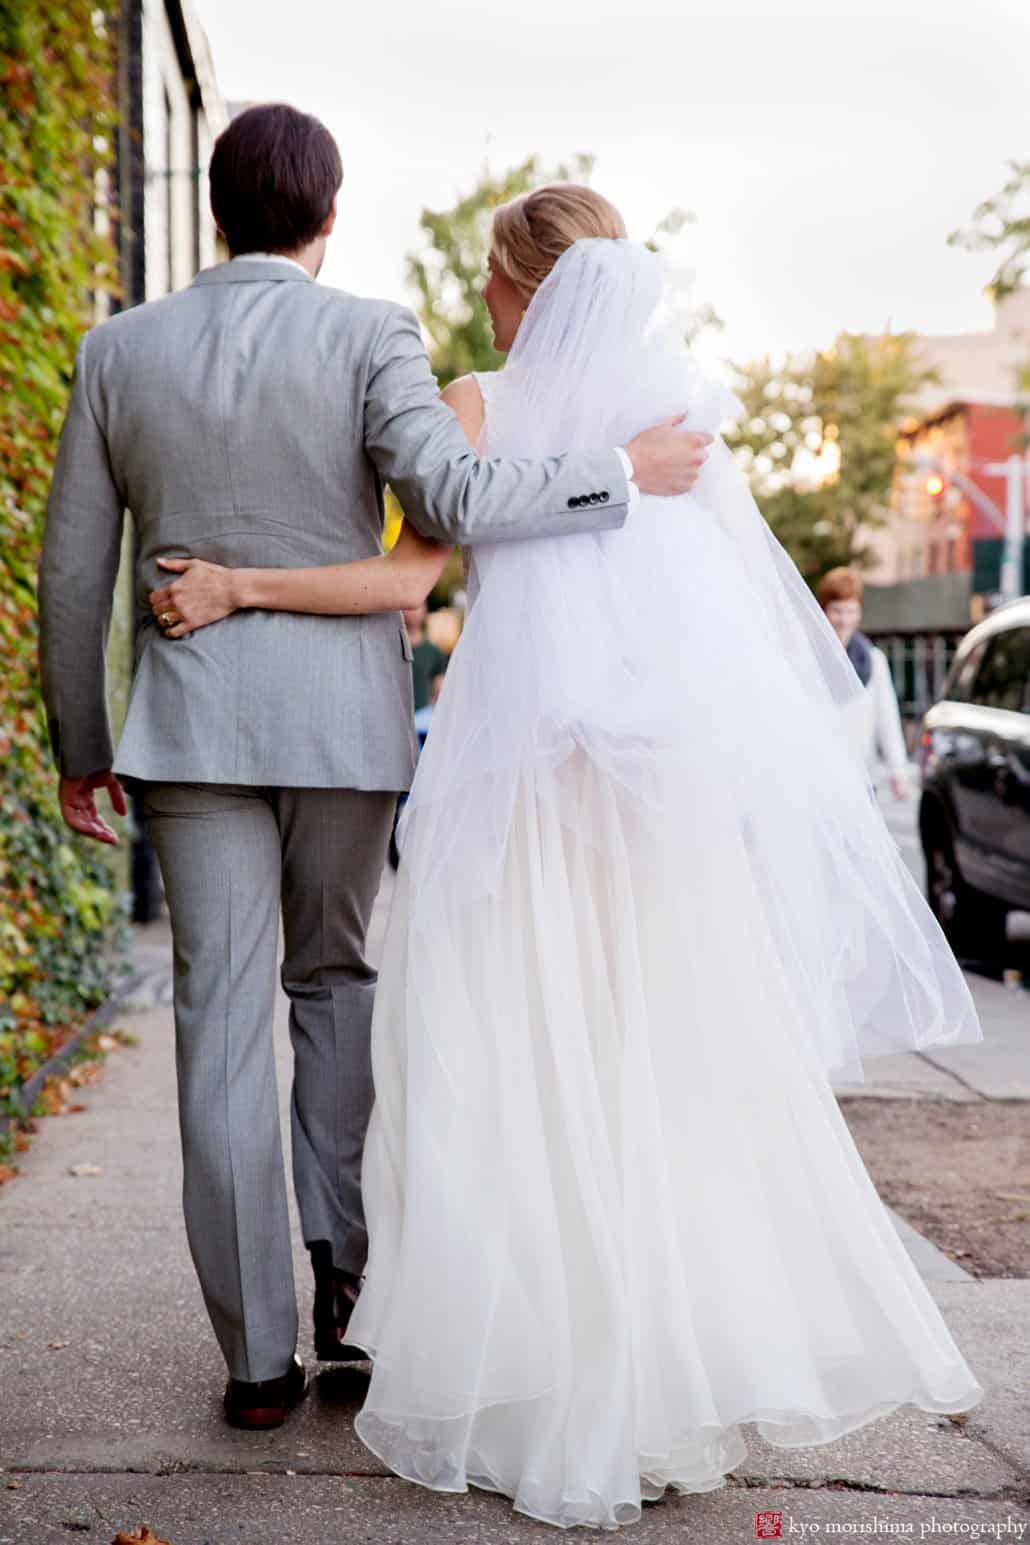 Bride and groom walk down the street in Brooklyn after Green Building wedding photographed by Kyo Morishima